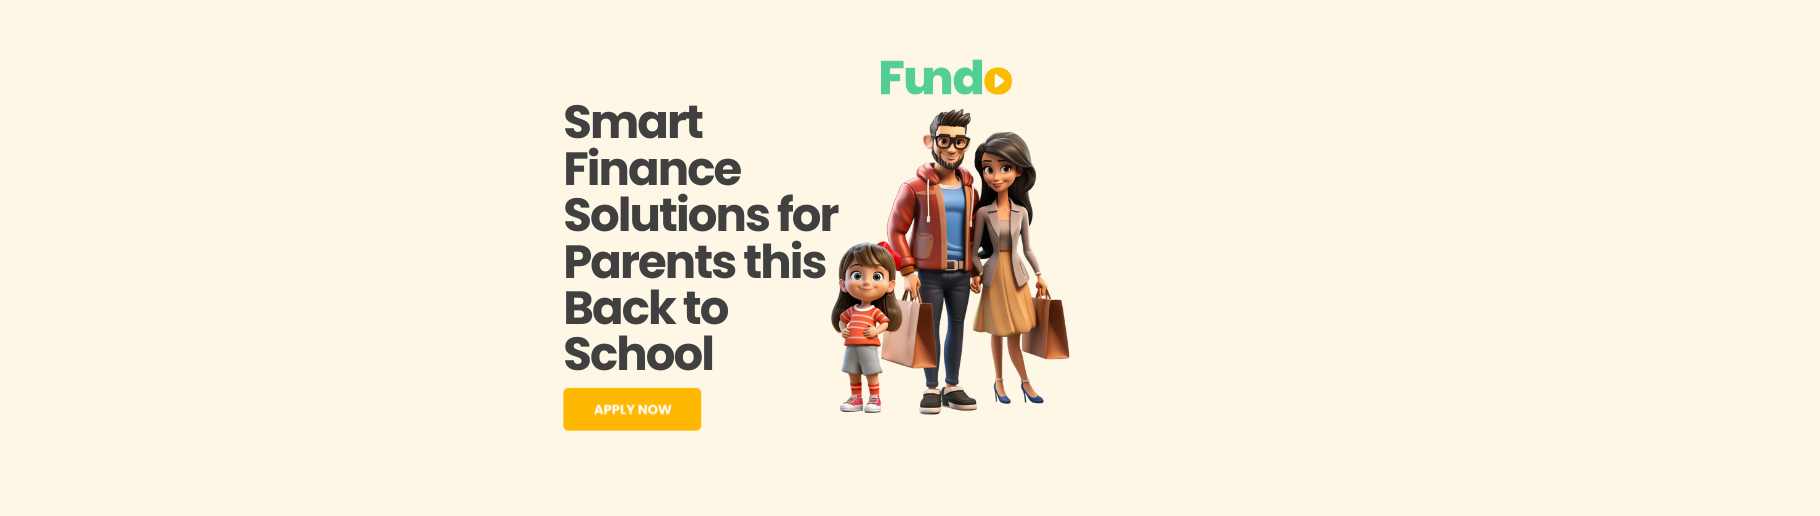 Flexible Finance Solutions for Parents this Back to School